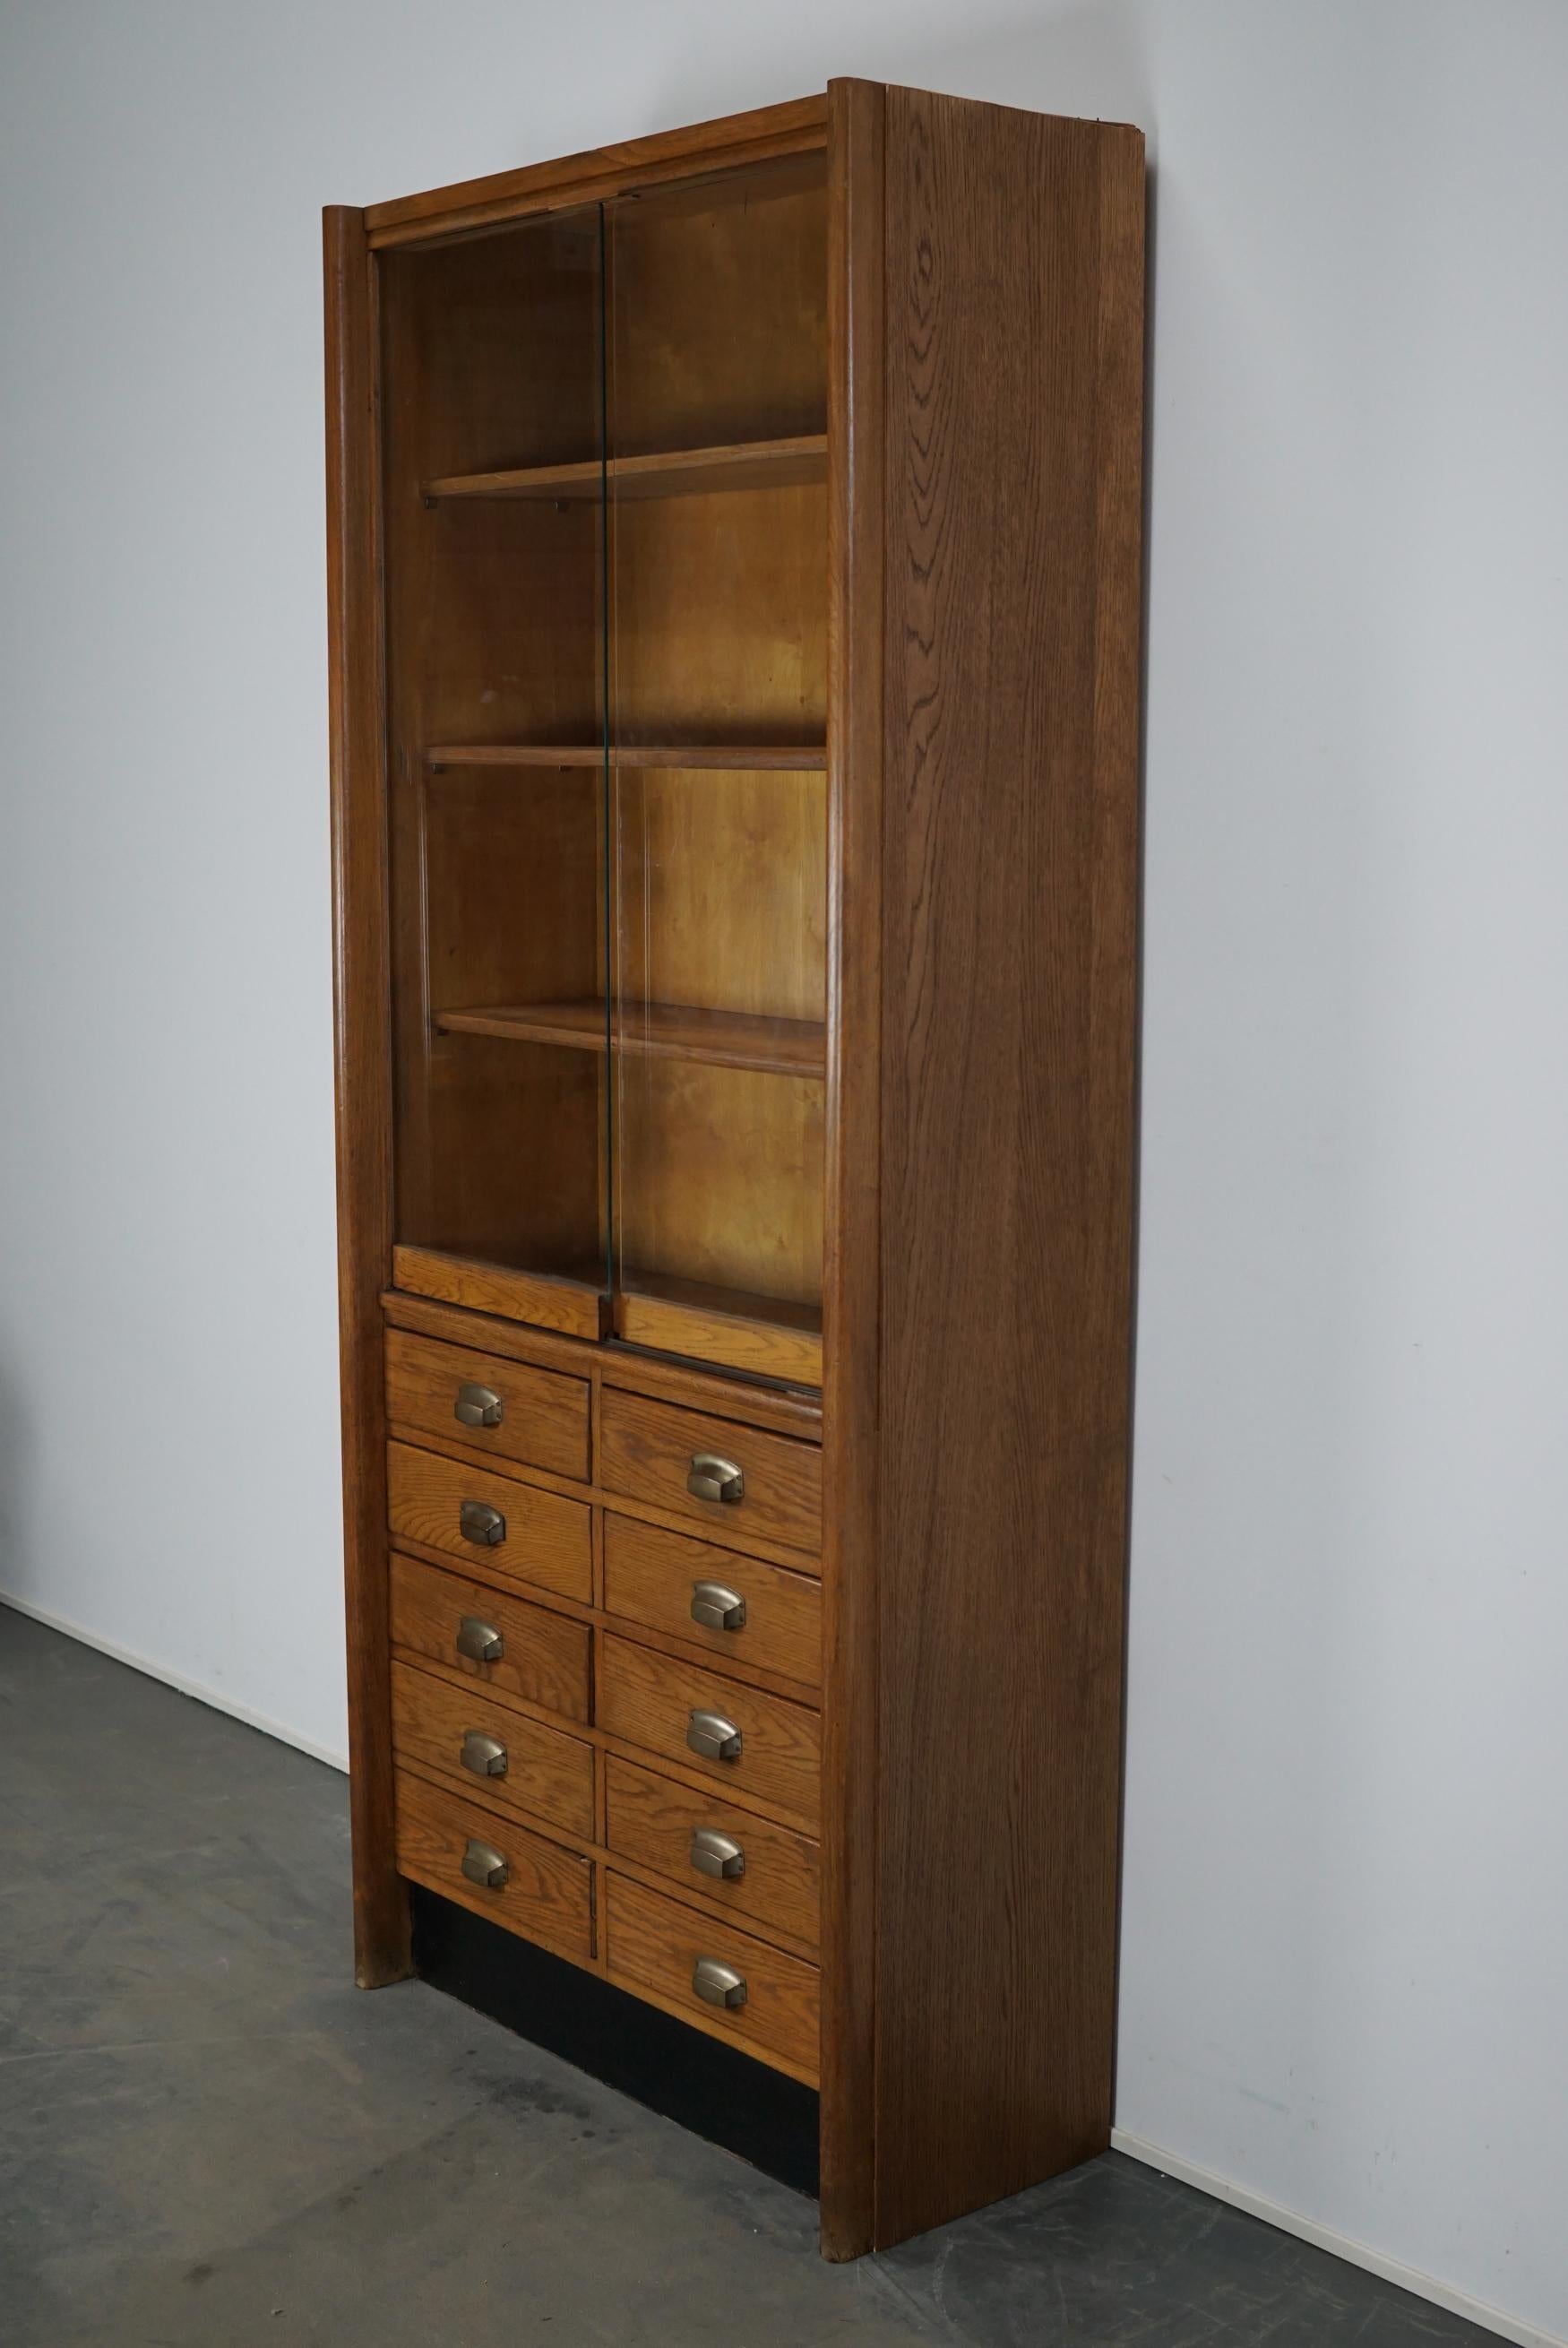 This apothecary cabinet was produced during the 1950s in Germany. This piece features 10 drawers with nice metal cup handles and two glass sliding doors with three shelves behind them. The interior dimensions of the drawers are: D x W x H 29 x 39 x